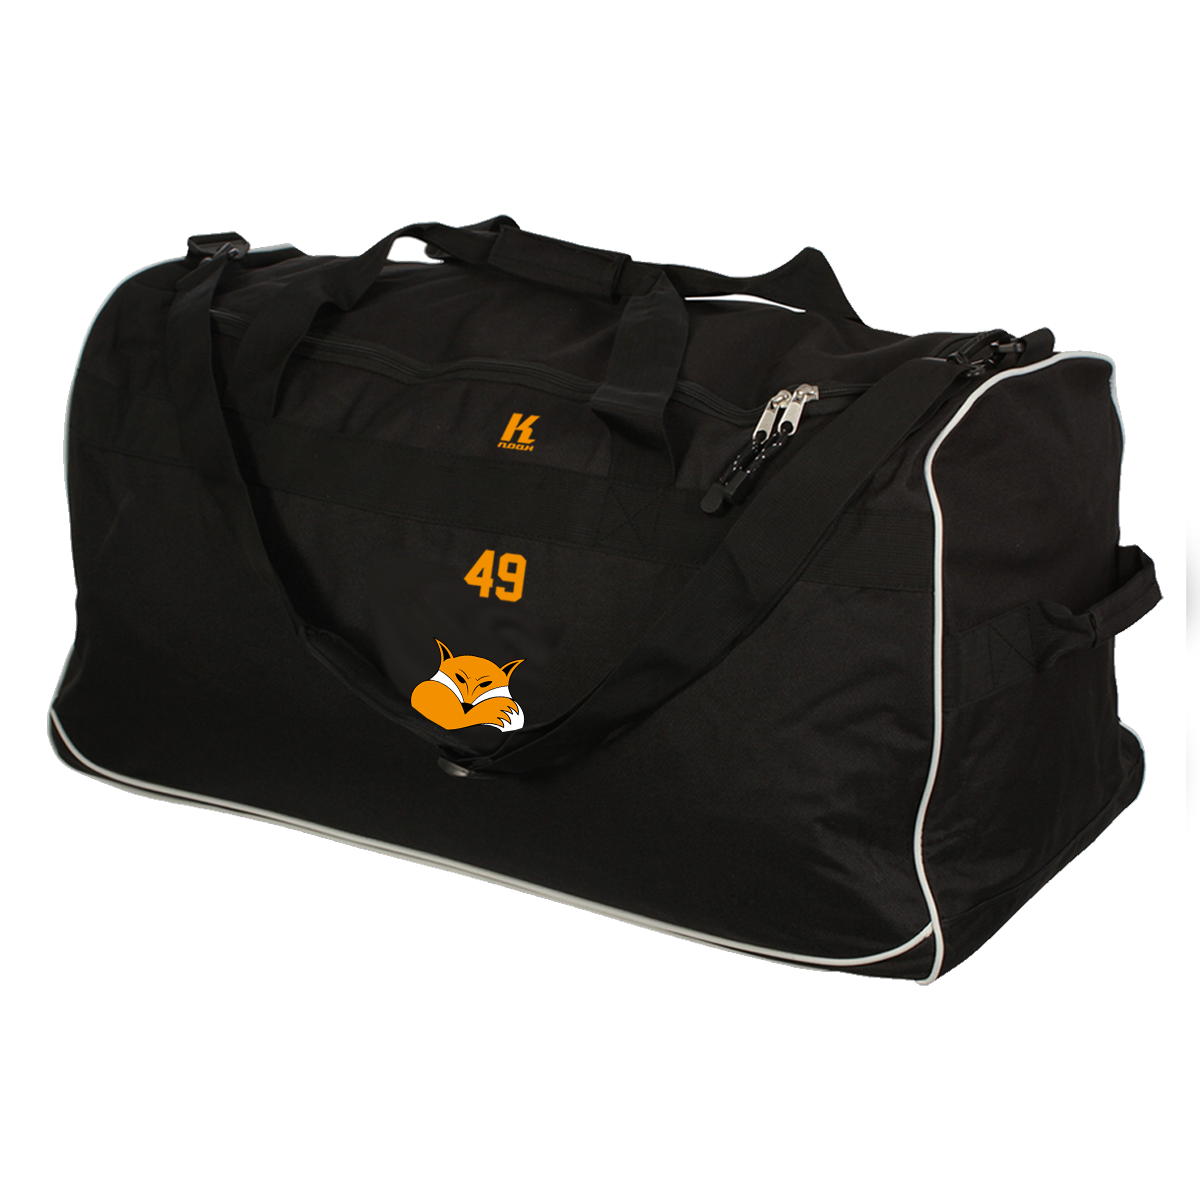 Foxes Jumbo Team Kitbag with Playernumber or Initials